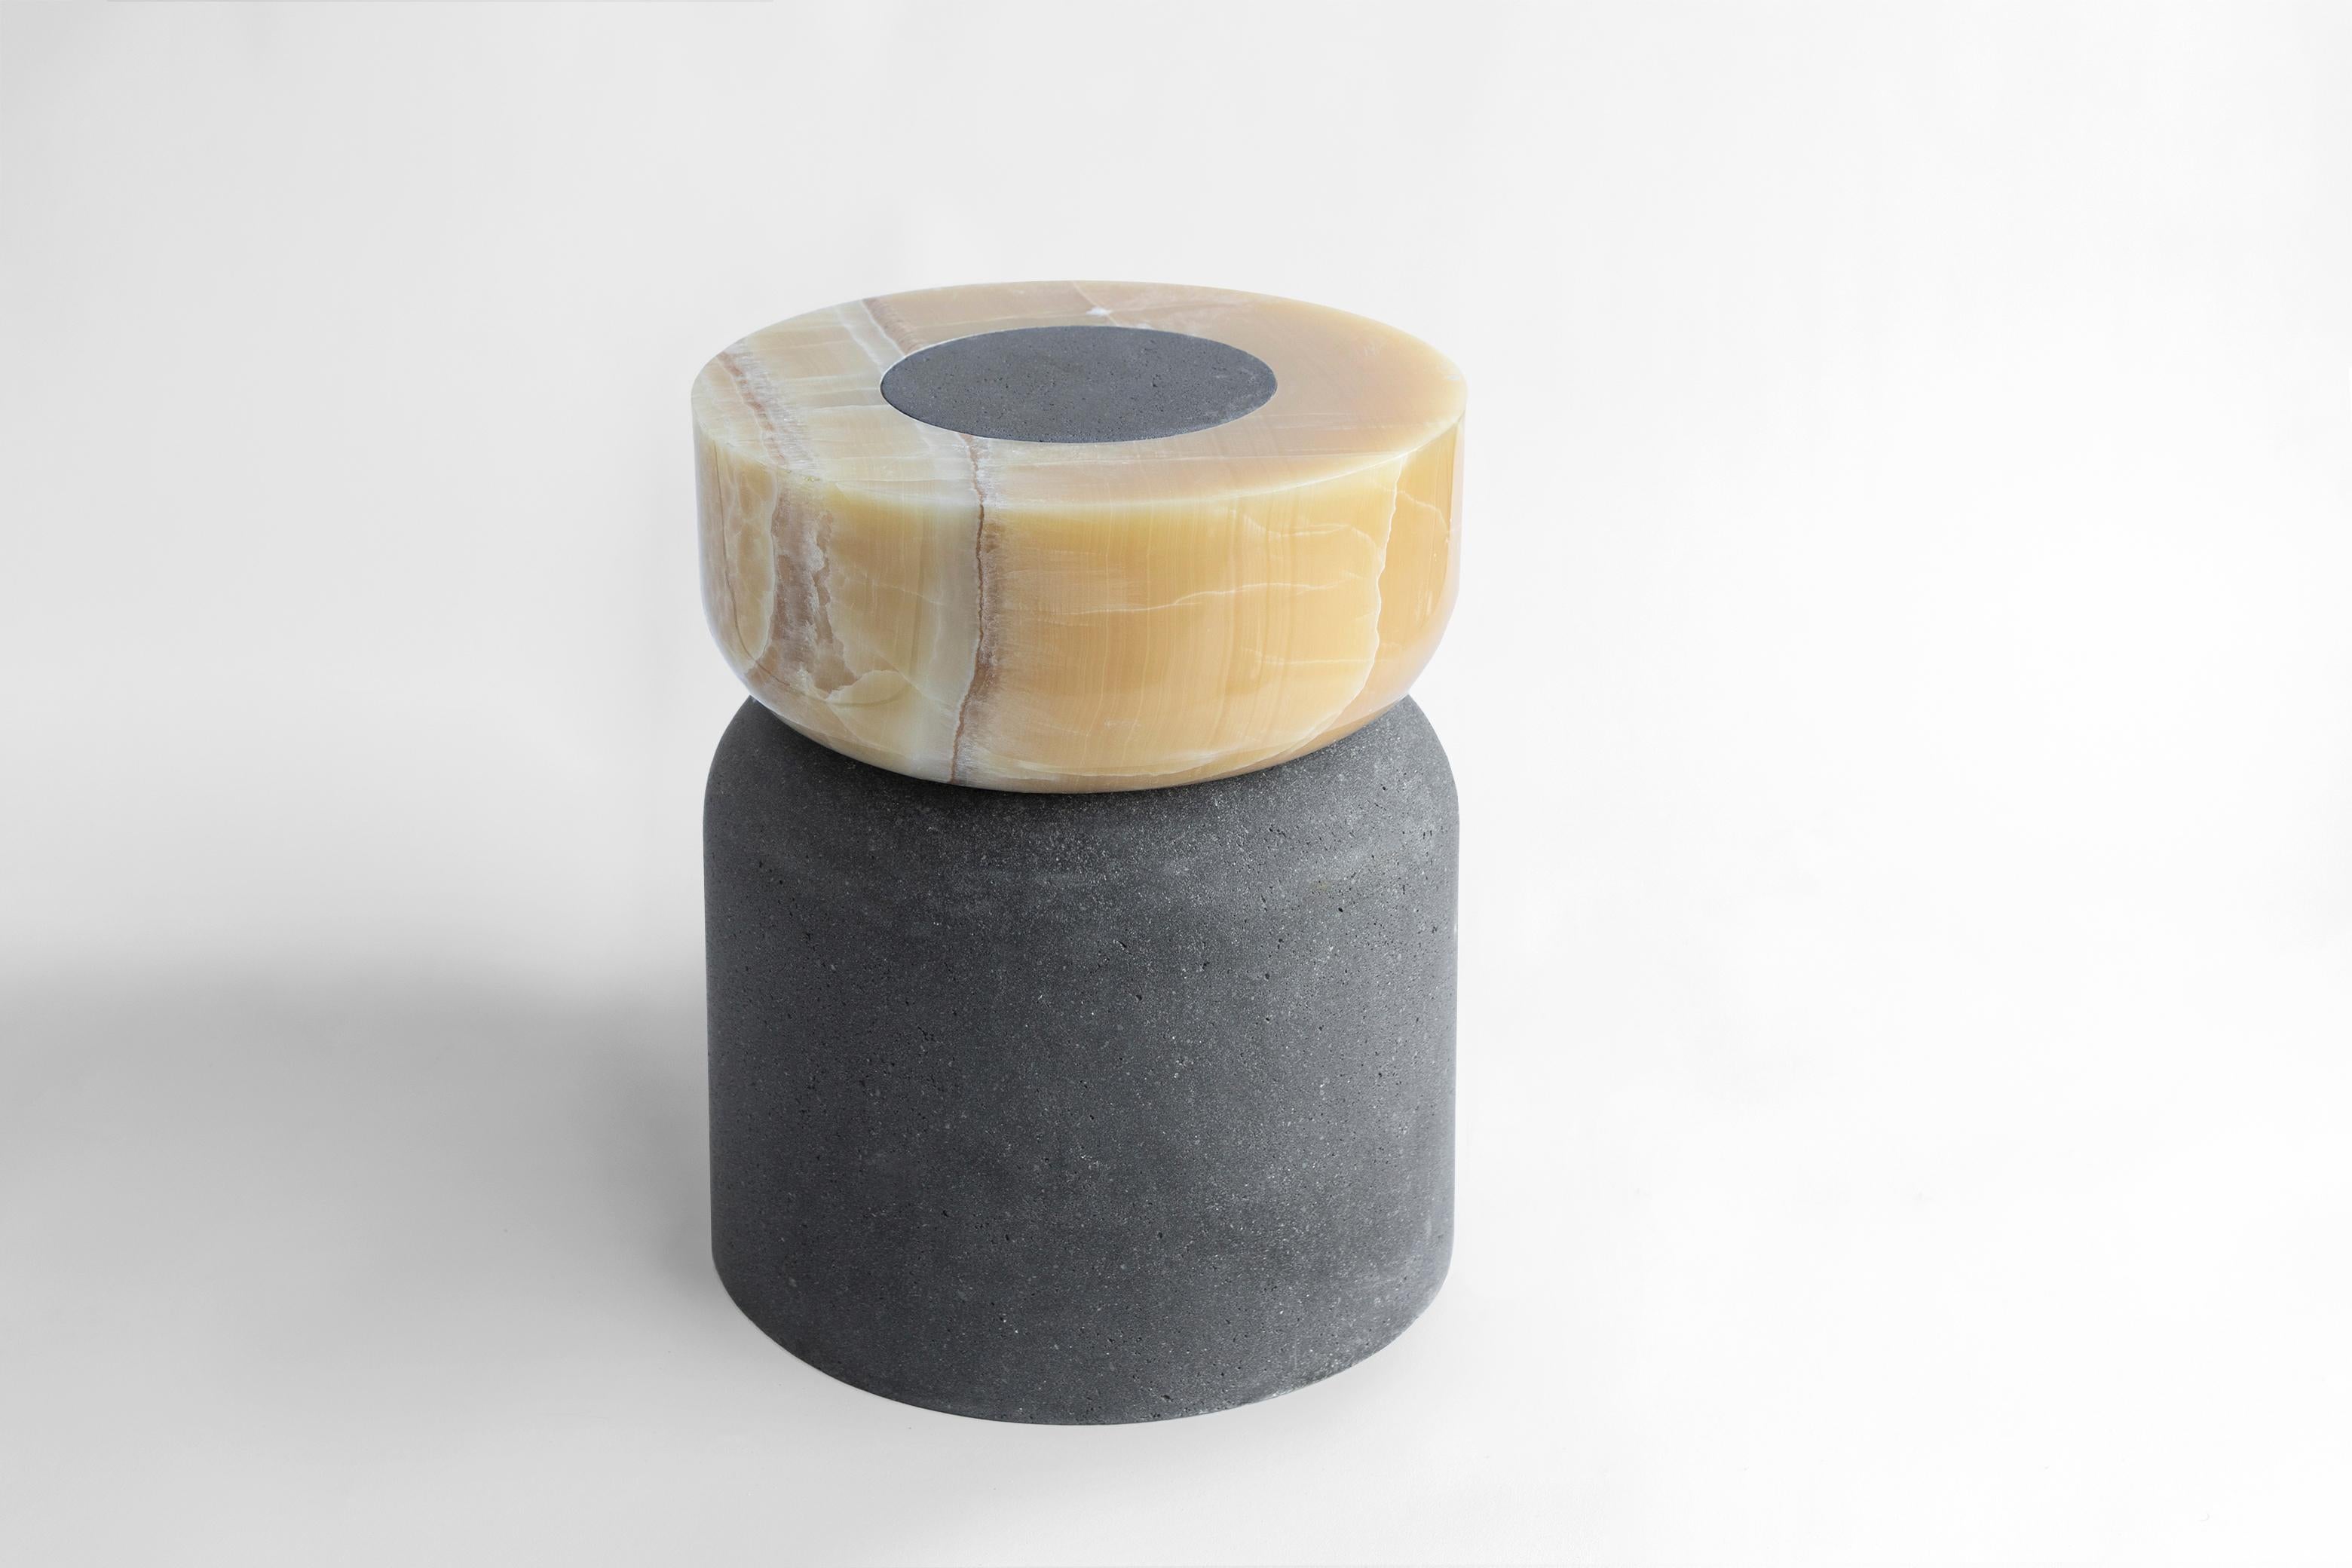 Stone Volcanic Shade IV Stool/Table by Sten Studio, Represented by Tuleste Factory